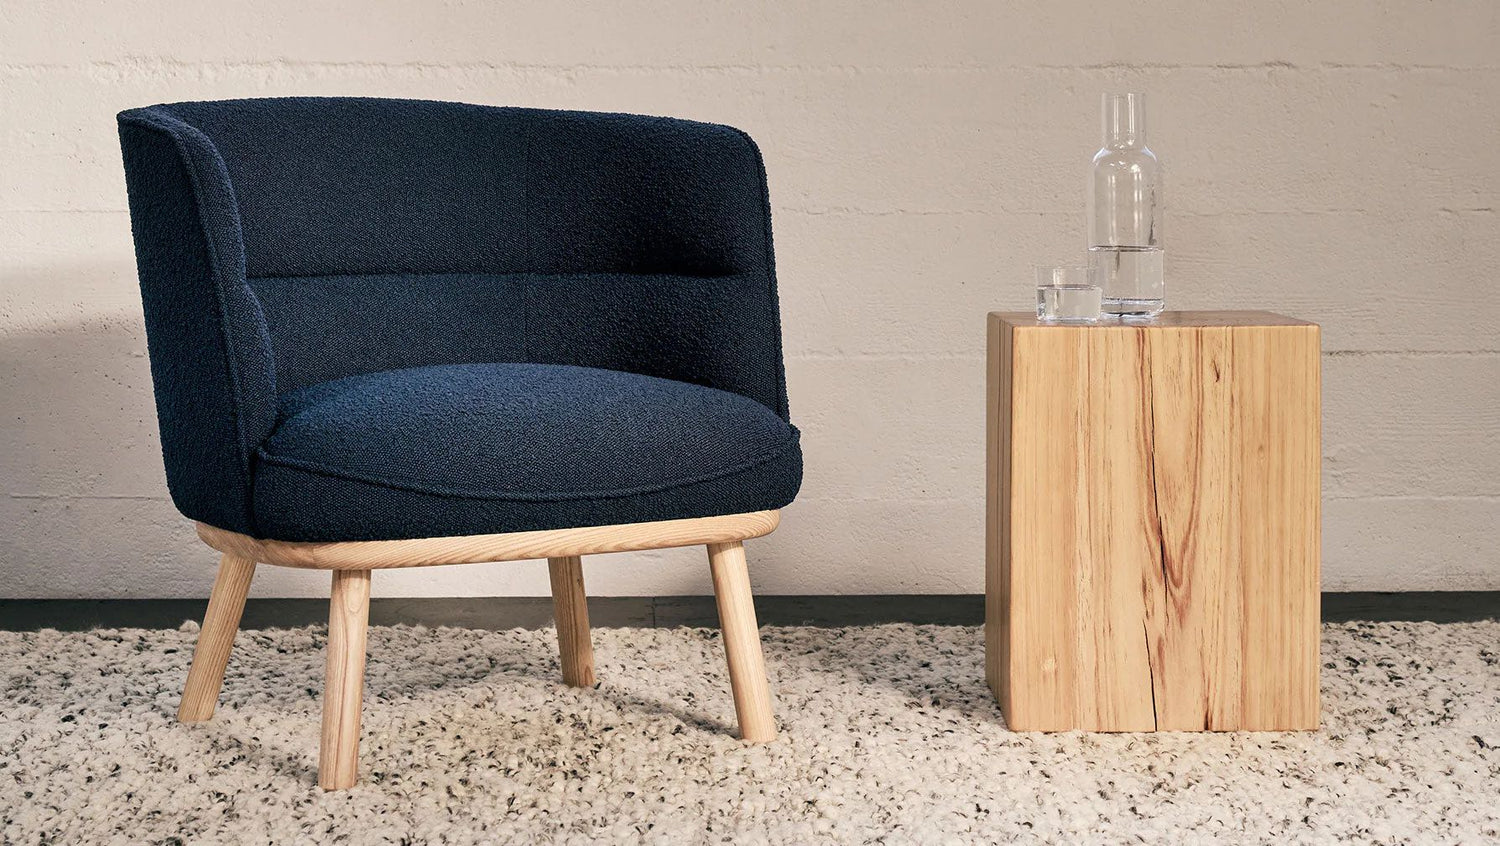 A modern black upholstered chair with wooden legs is positioned next to a minimalist wooden side table. On the table, there is a clear glass bottle and a glass of water. The setup is placed on a light textured carpet against a beige wall.